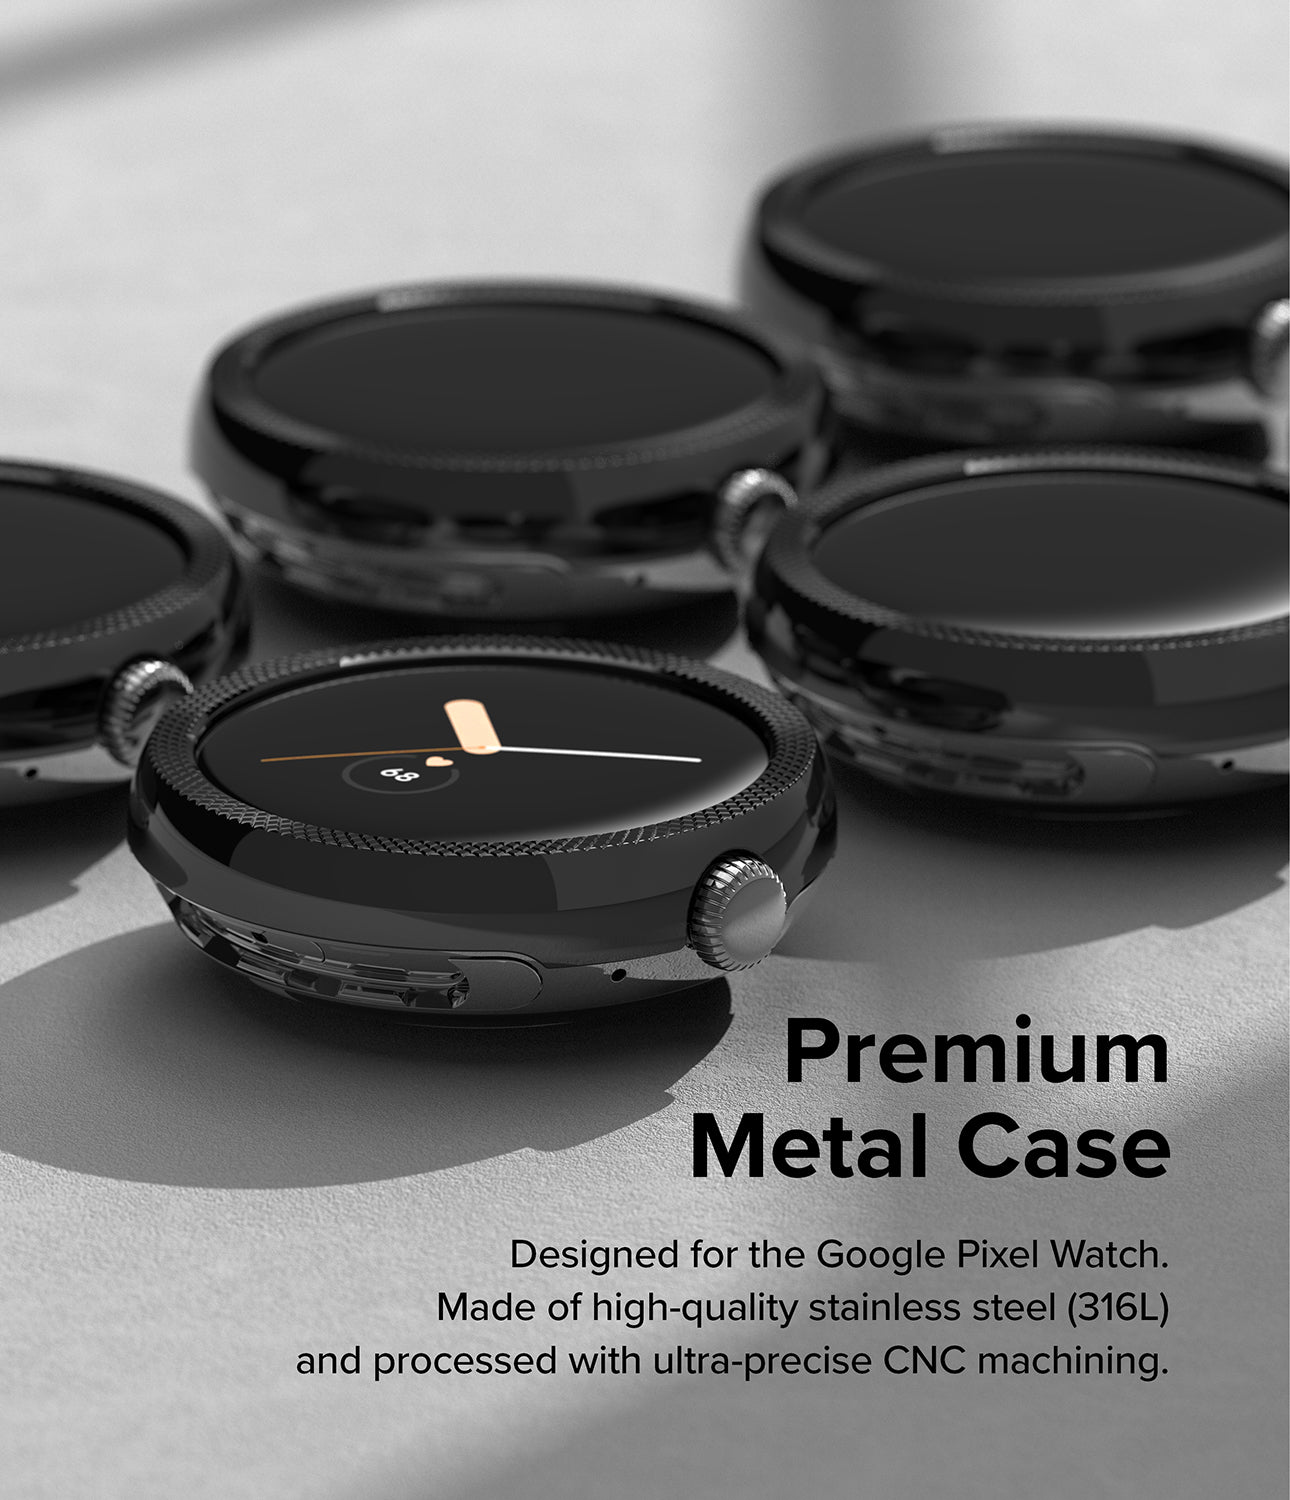 Premium Metal Case - Designed for the Google Pixel Watch. Made of high-quality stainless steel (316L) and processed with ultra-precise CNC machining.